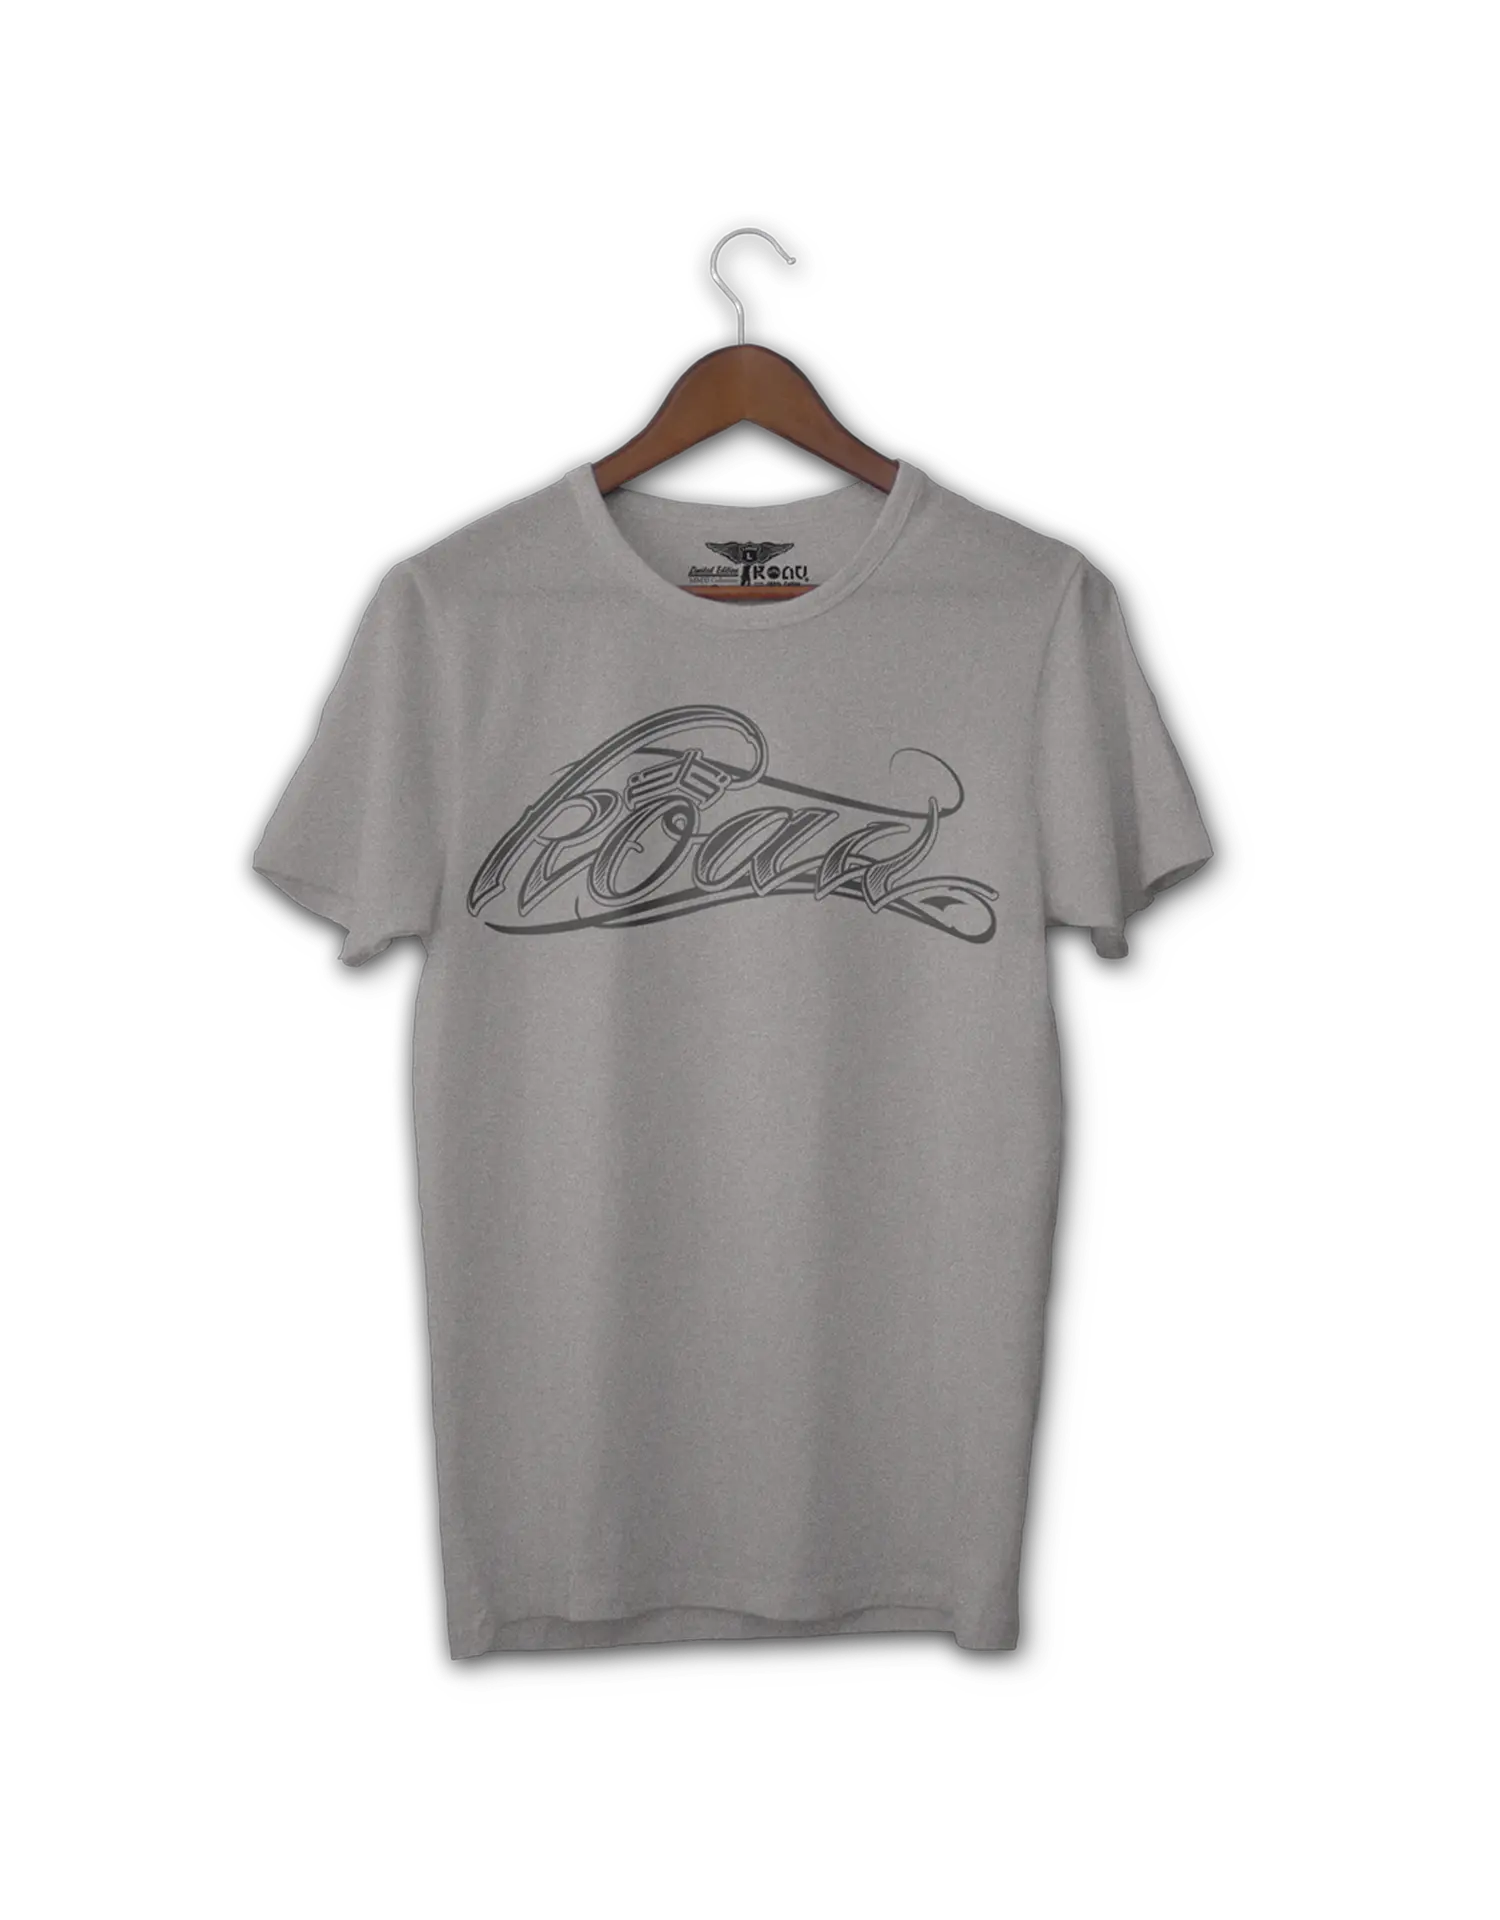 Scripted Heather Grey Premium 90% Cotton/10% Polyester T-Shirt by KOAV